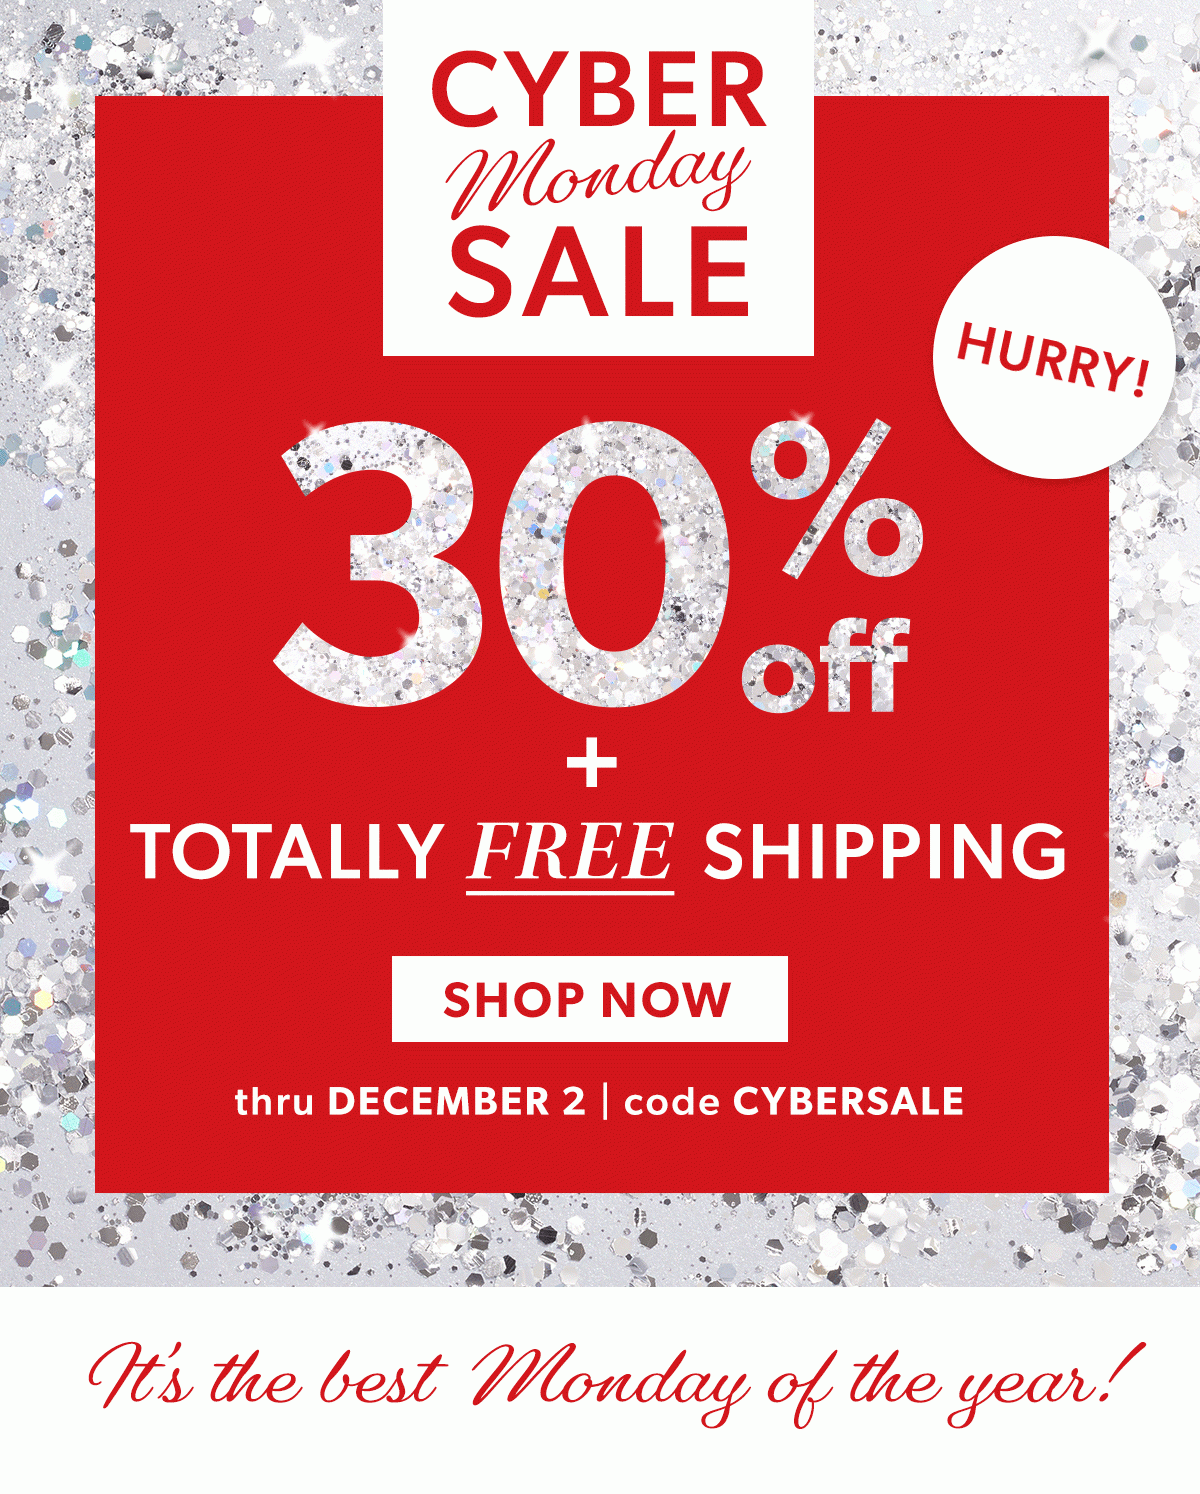 Cyber Monday Sale. 30% Off + Totally Free Shipping. Shop Now